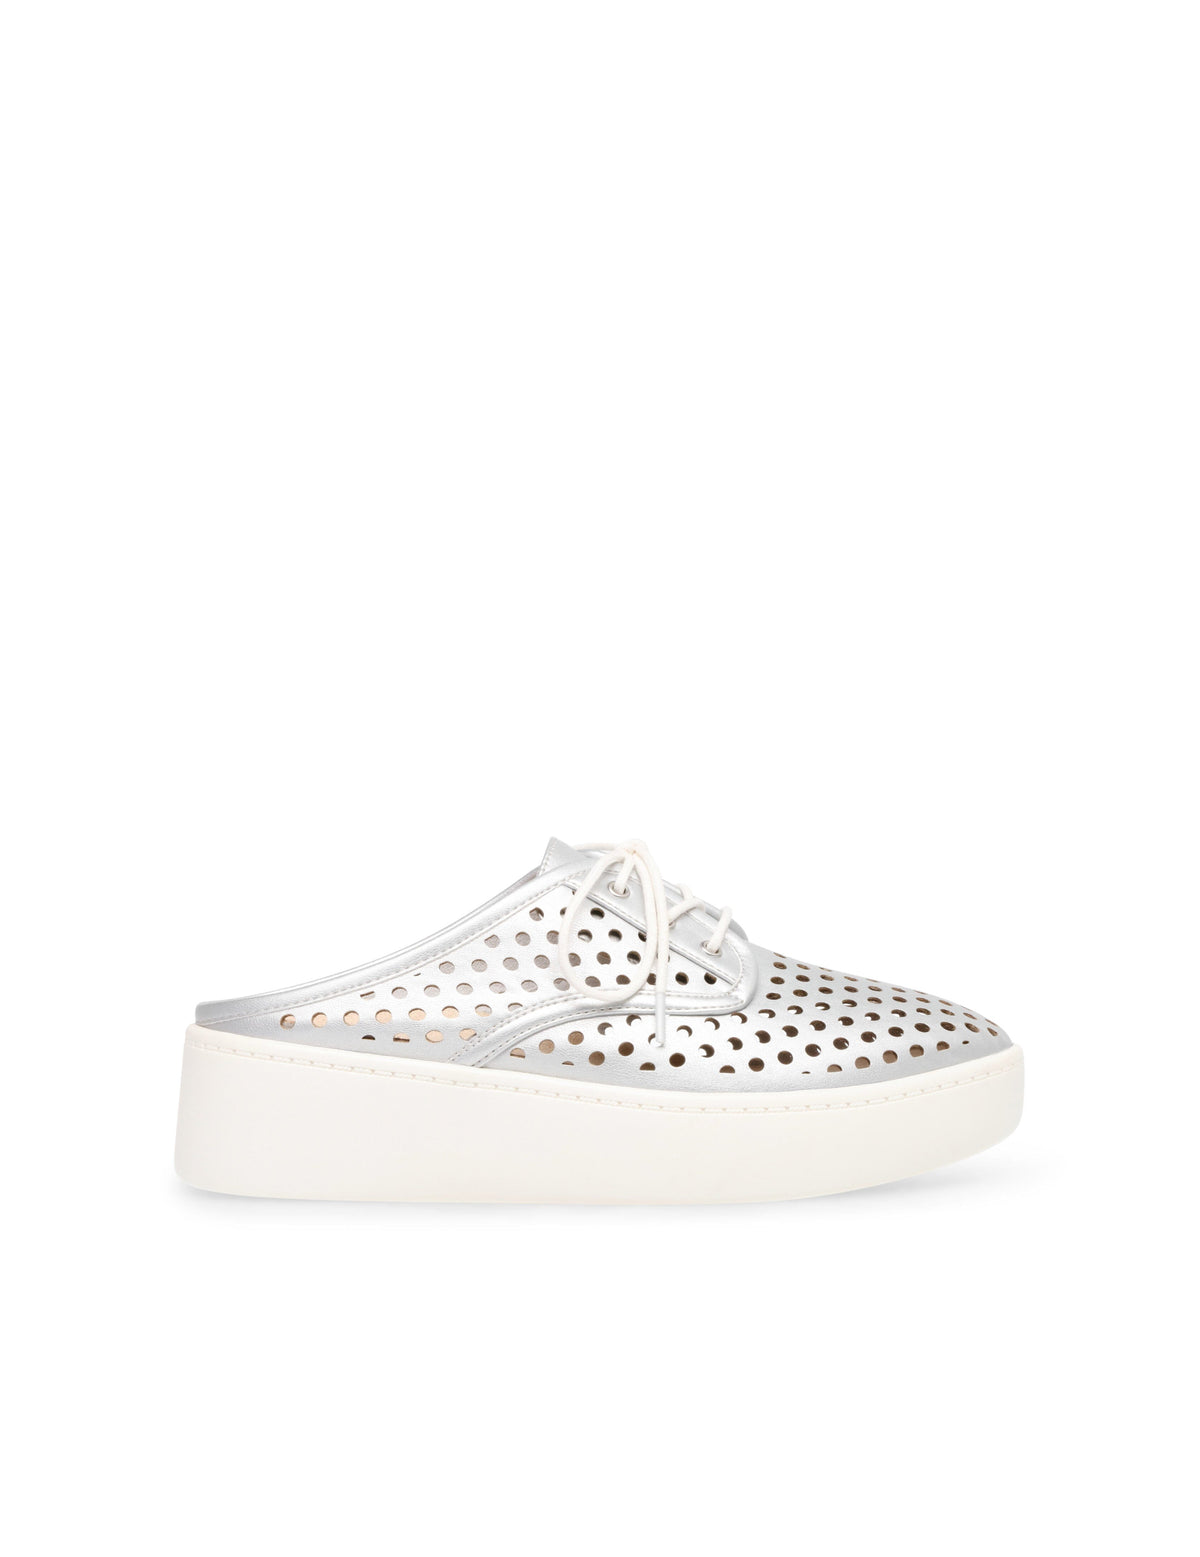 Tricia Lace Up Sneaker Mule